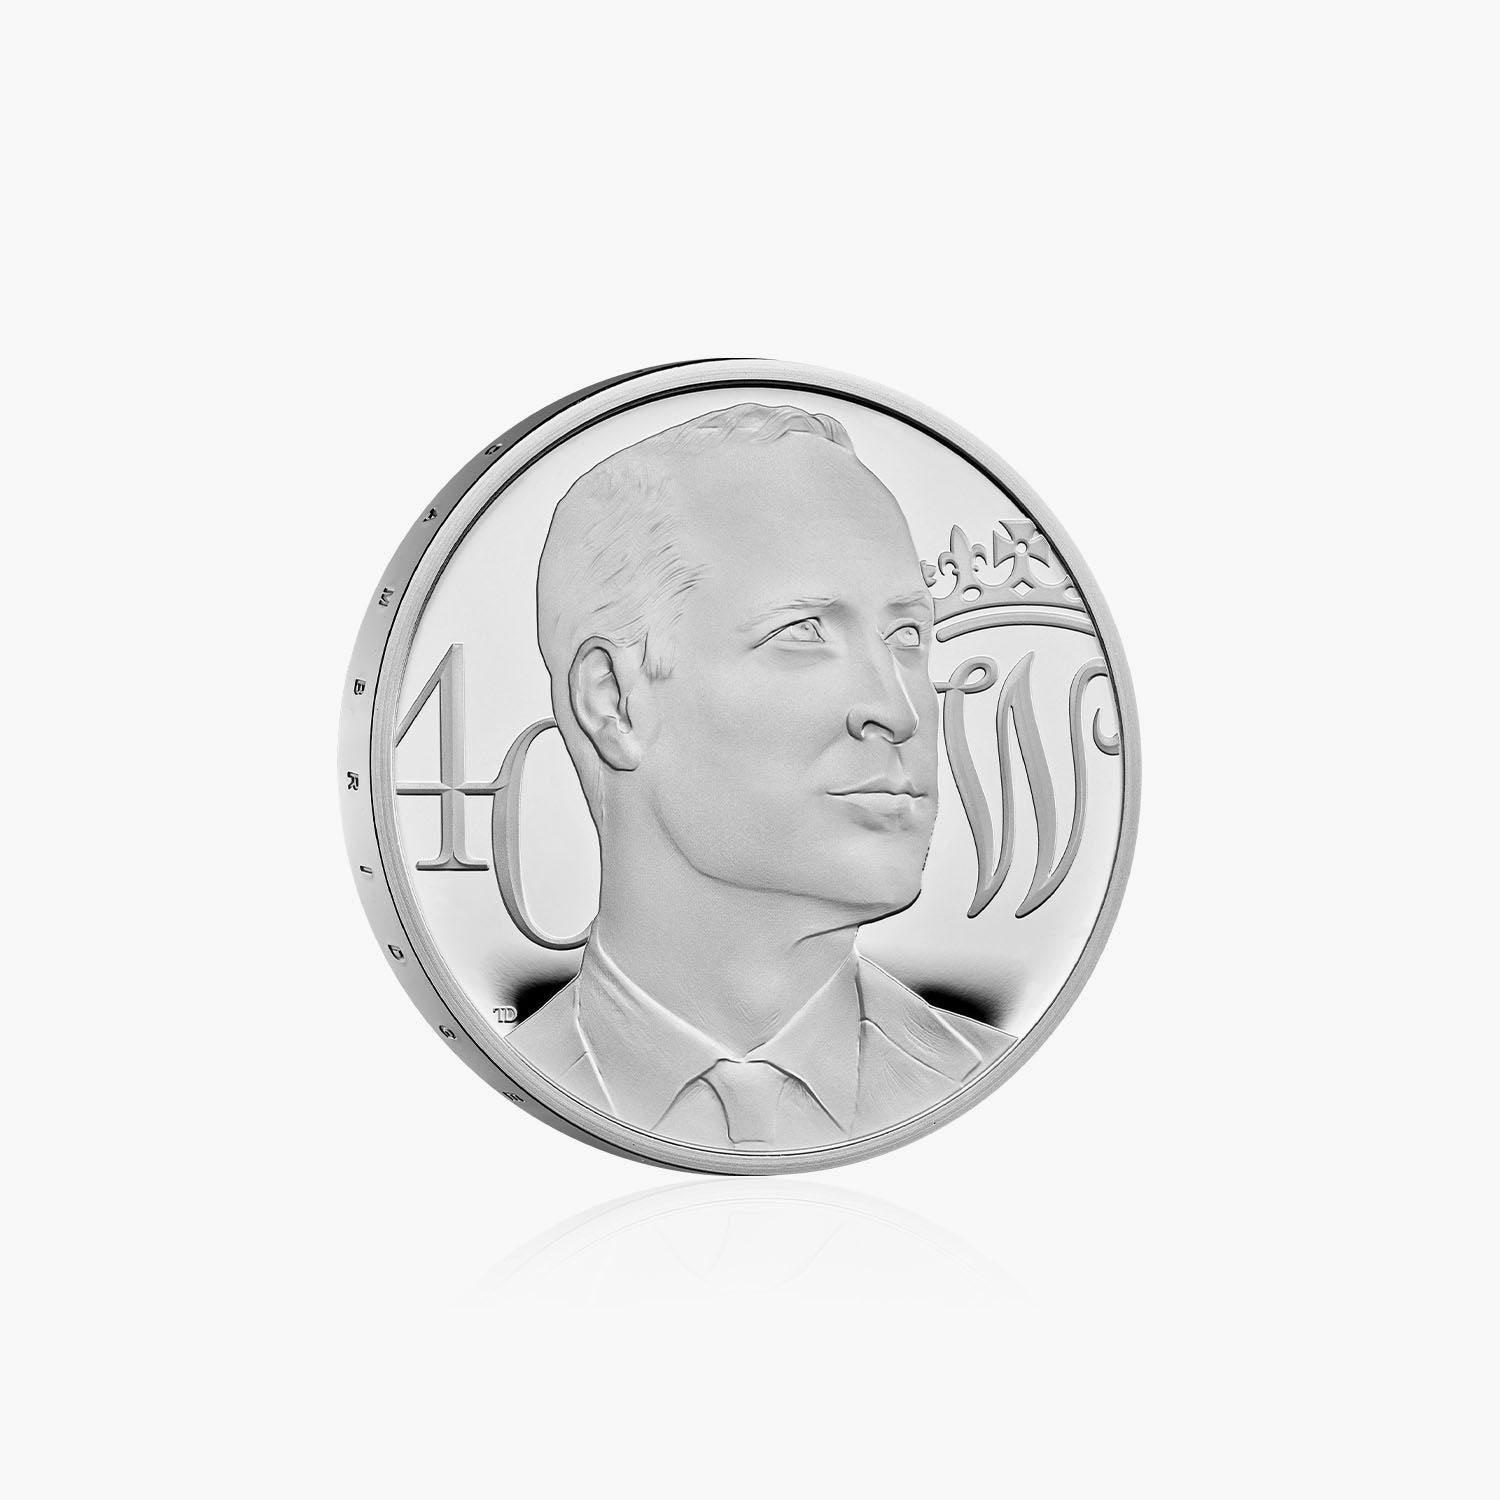 40th Birthday of HRH Prince William, Duke of Cambridge 2022 UK £5 Silver Proof Coin